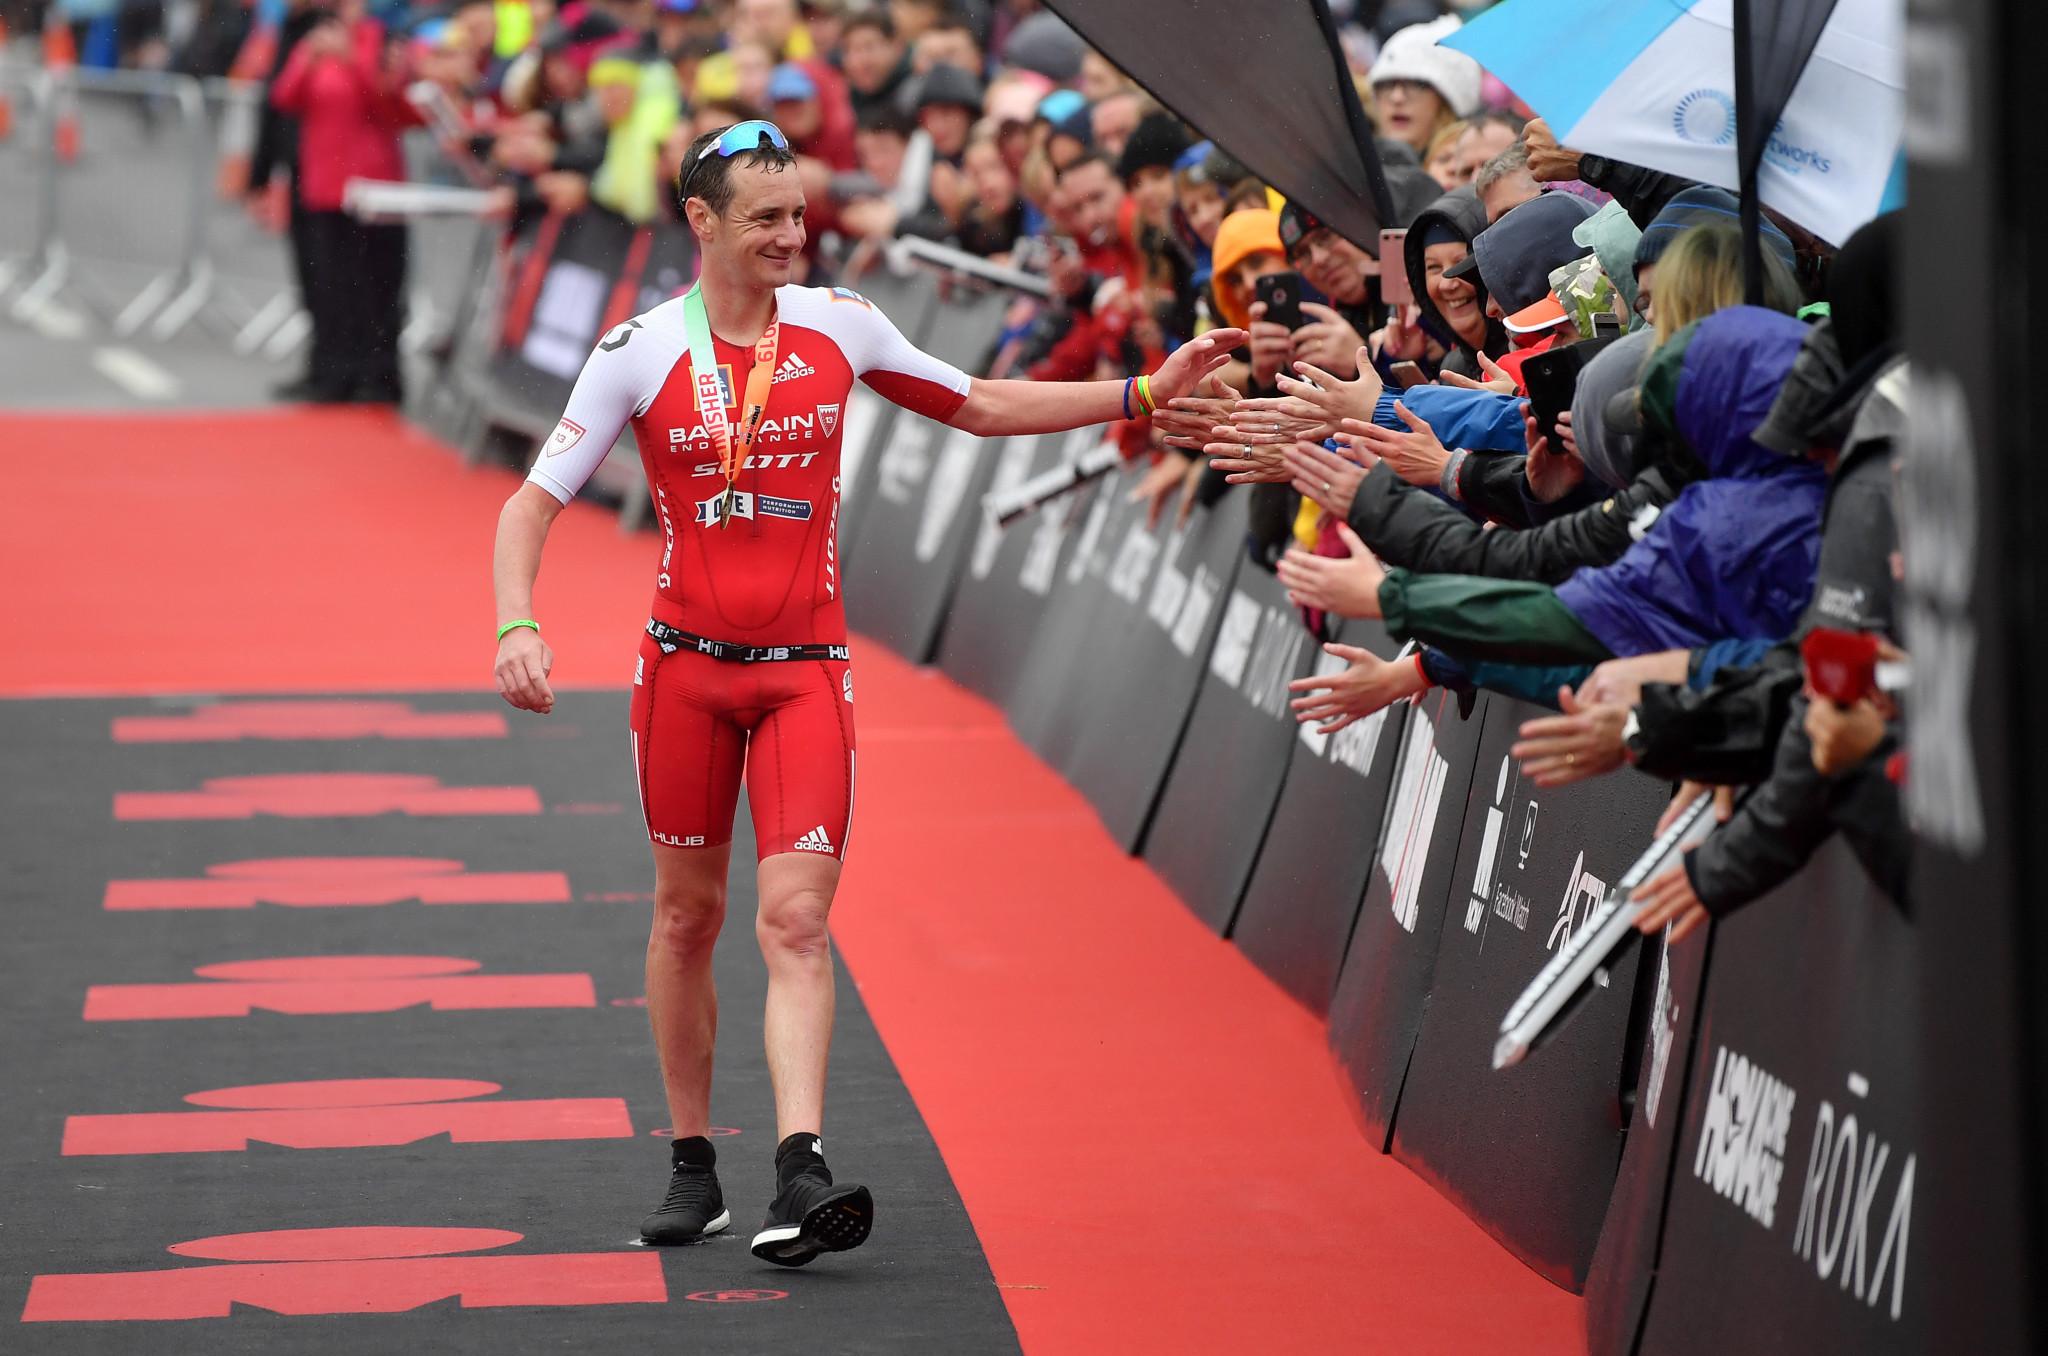 Alistair Brownlee is also part of the Athletes’ Commission of the European Olympic Committees ©Getty Images